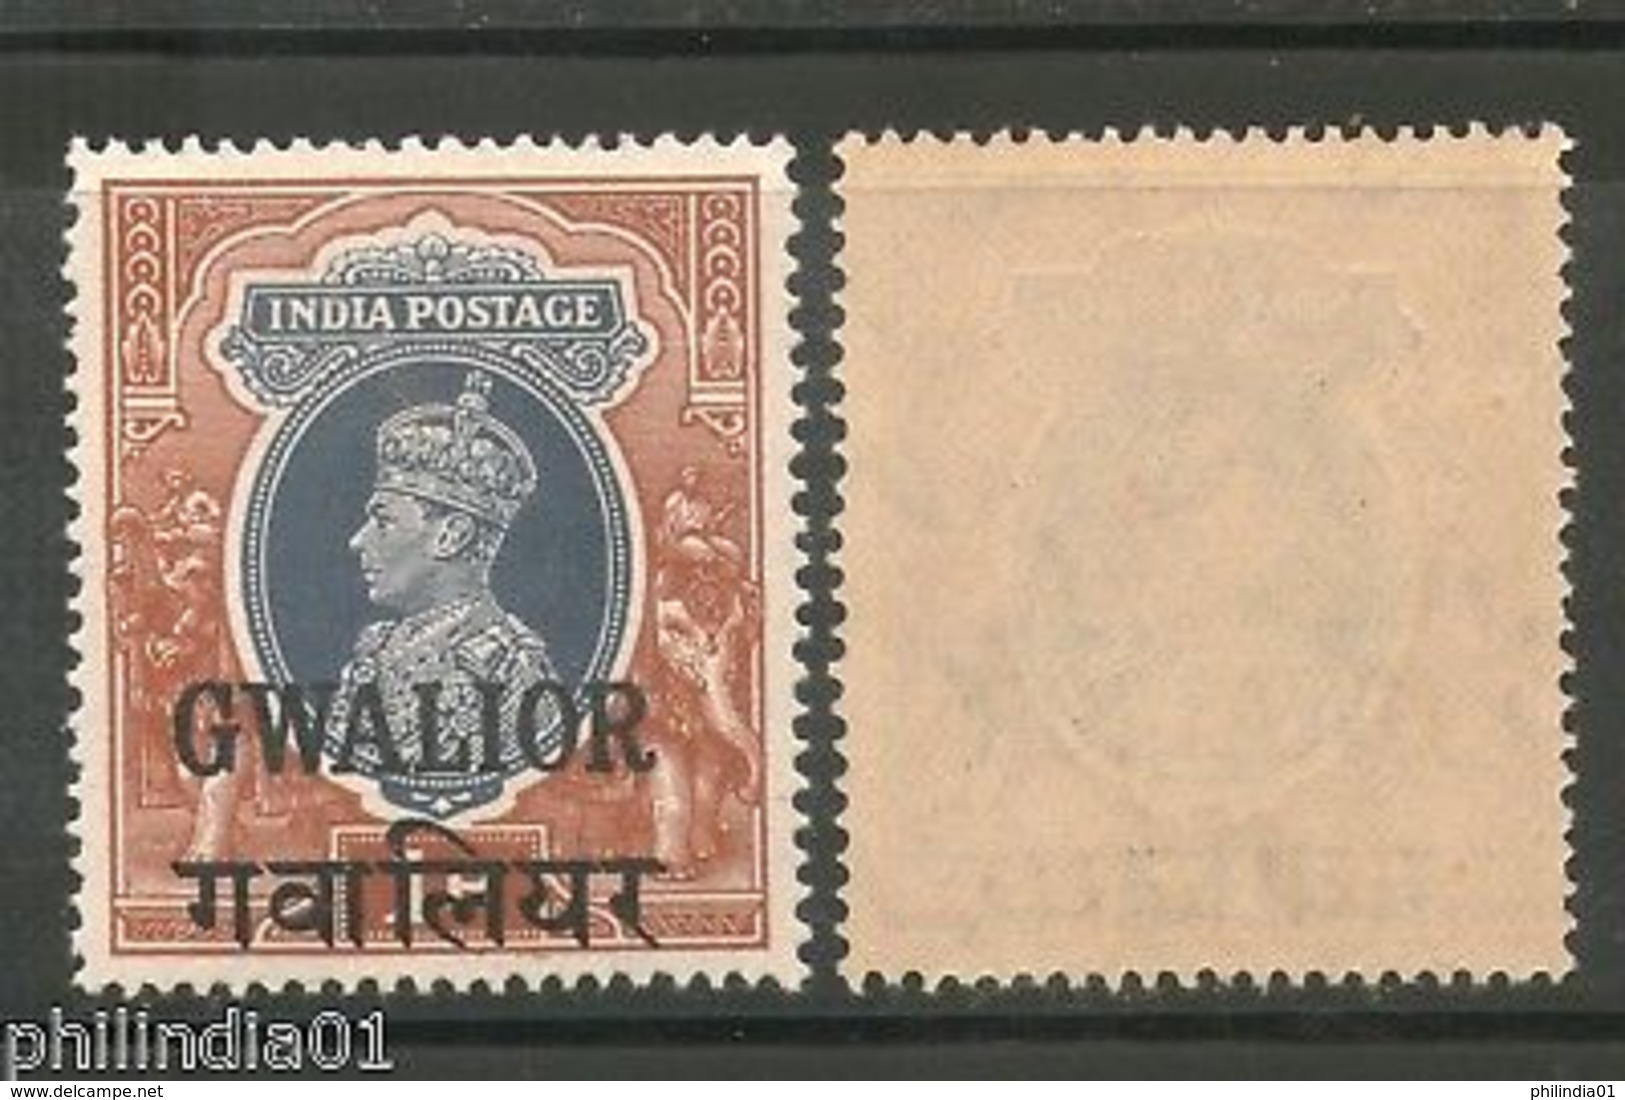 India Gwalior State 1 Re. KG VI Postage Stamp SG 112 / Sc 112 Cat $15 MNH - Gwalior